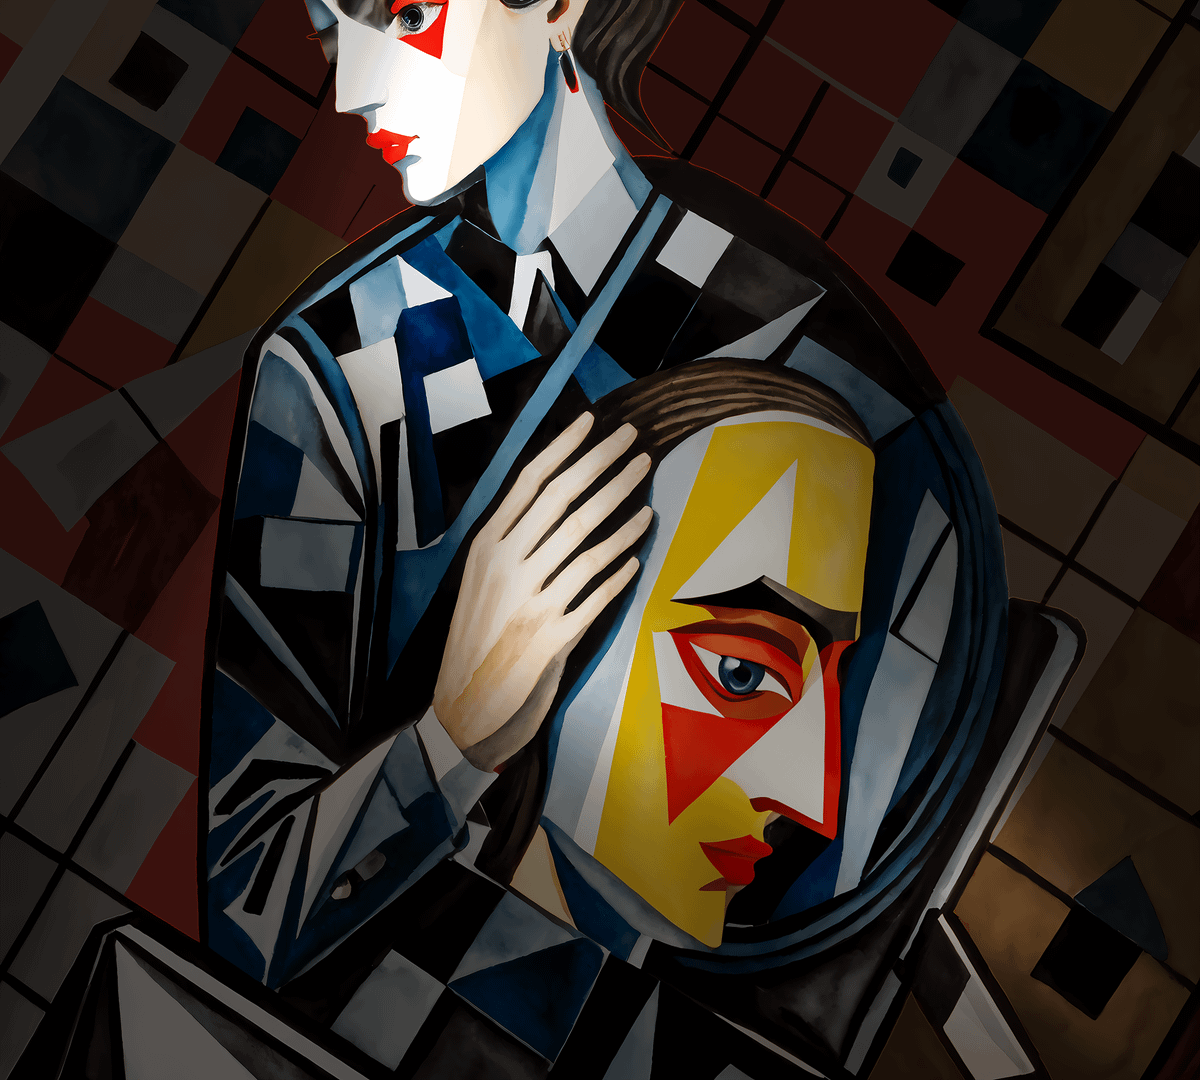 The abstract digital image by author, titled "Therapist's Delight," depicts a stylized human figure with geometric patterns and contrasting colors. The subject's face is divided into light and dark halves, with the light side featuring blue and gray checkered patterns and the shadowed side in solid black with a striking red eye.  The figure's hand is pressed against their chest, fingers splayed, revealing a bright yellow angular shape underneath, possibly representing the heart or inner self. The bold, fragmented forms and dramatic color contrasts create a sense of inner turmoil, duality, or conflicting emotions.  Visually, the piece combines cubist and art deco aesthetics, using strong lines, angles, and a limited palette to create a impactful, somewhat mysterious composition. The segmented background in muted red and gray tones adds depth and enhances the overall mood.